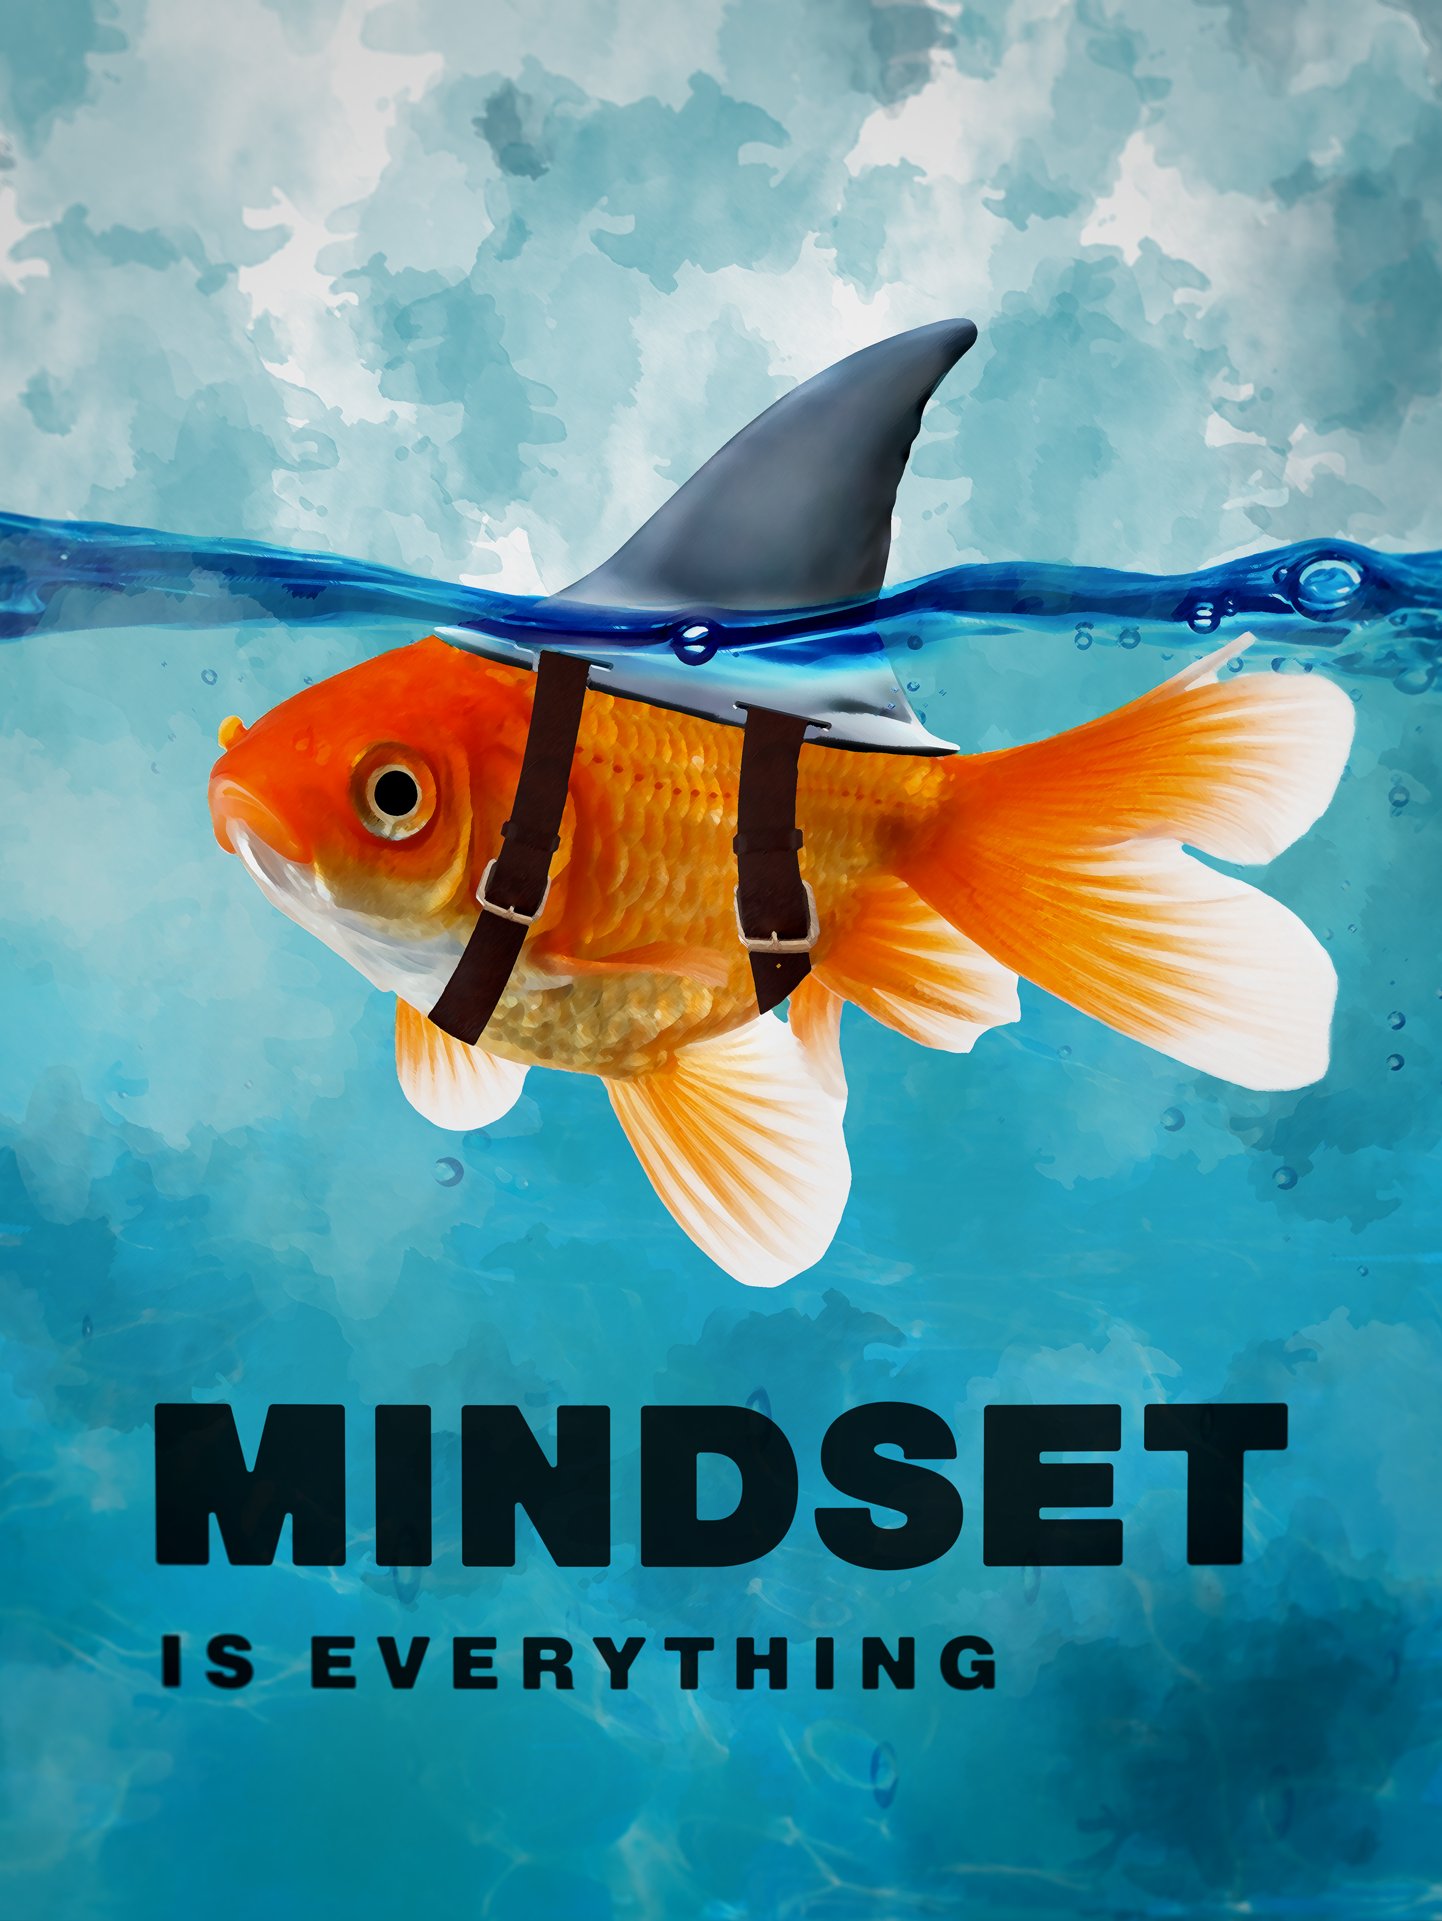 HMS Dalers your mindset and you can change your life!